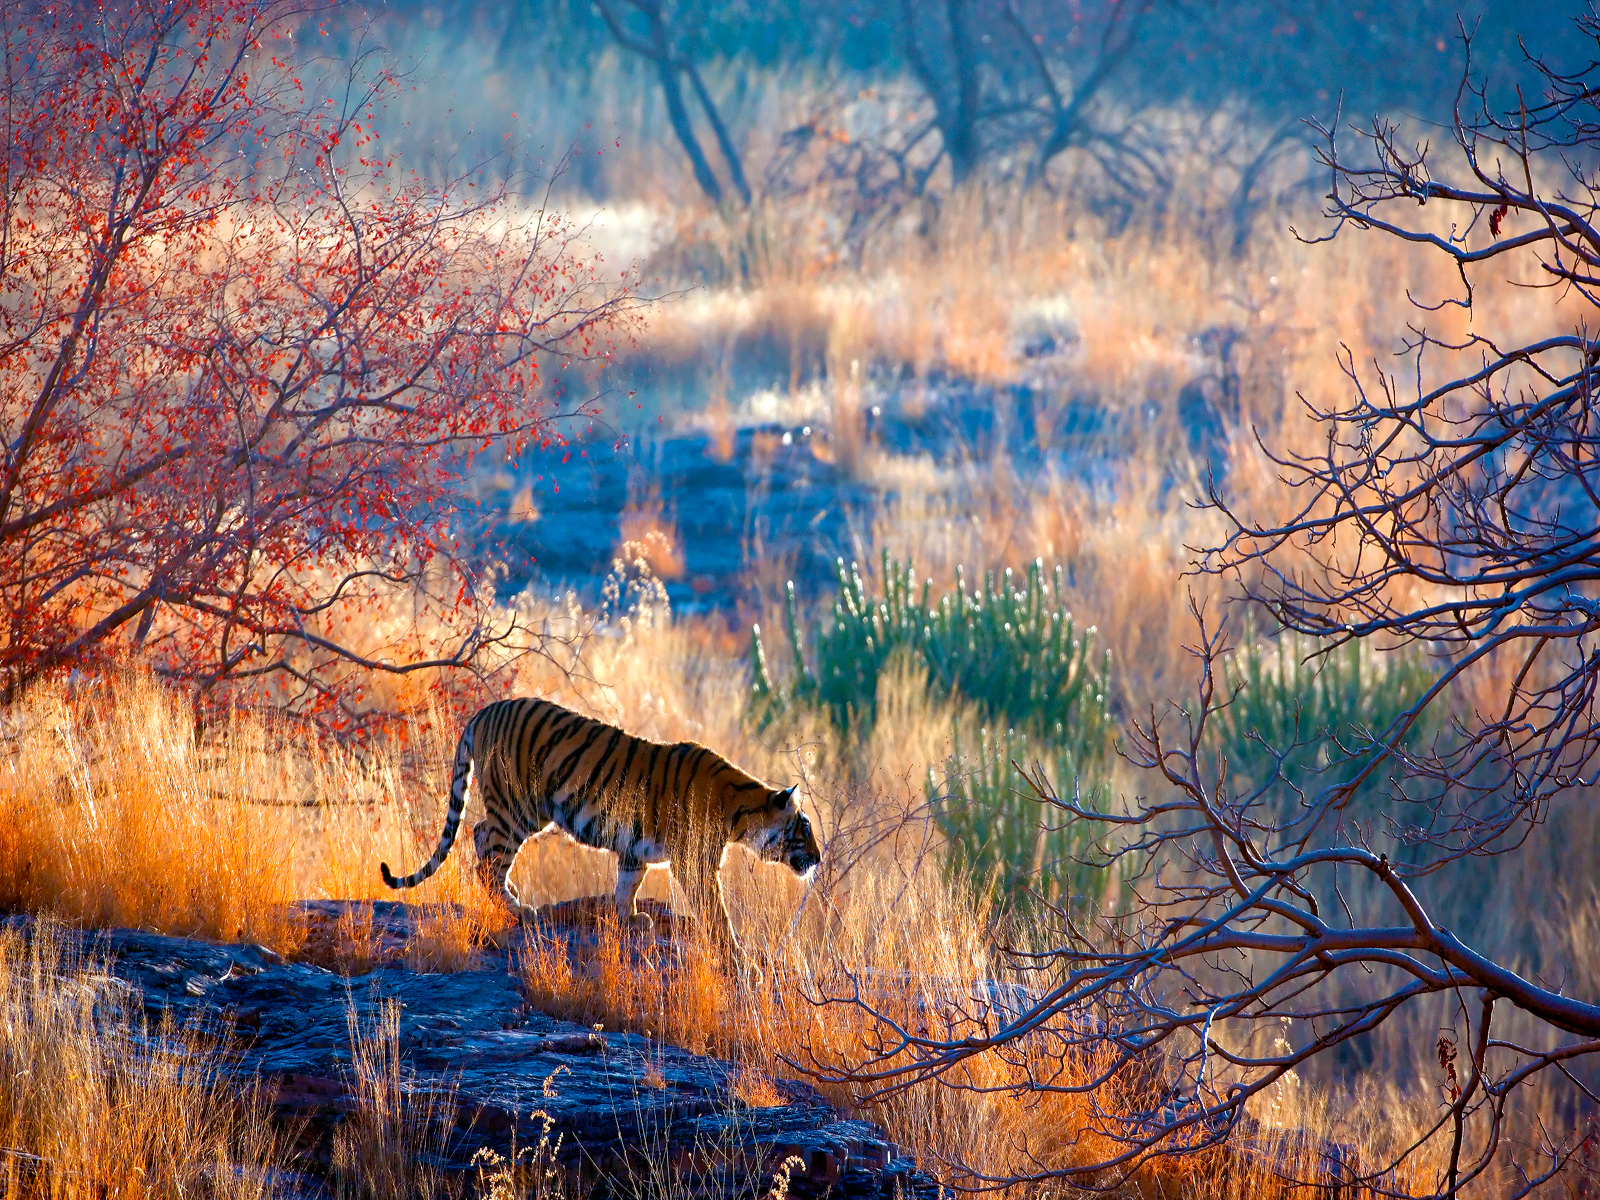 Bengal tiger stalking through colourful landscape, India